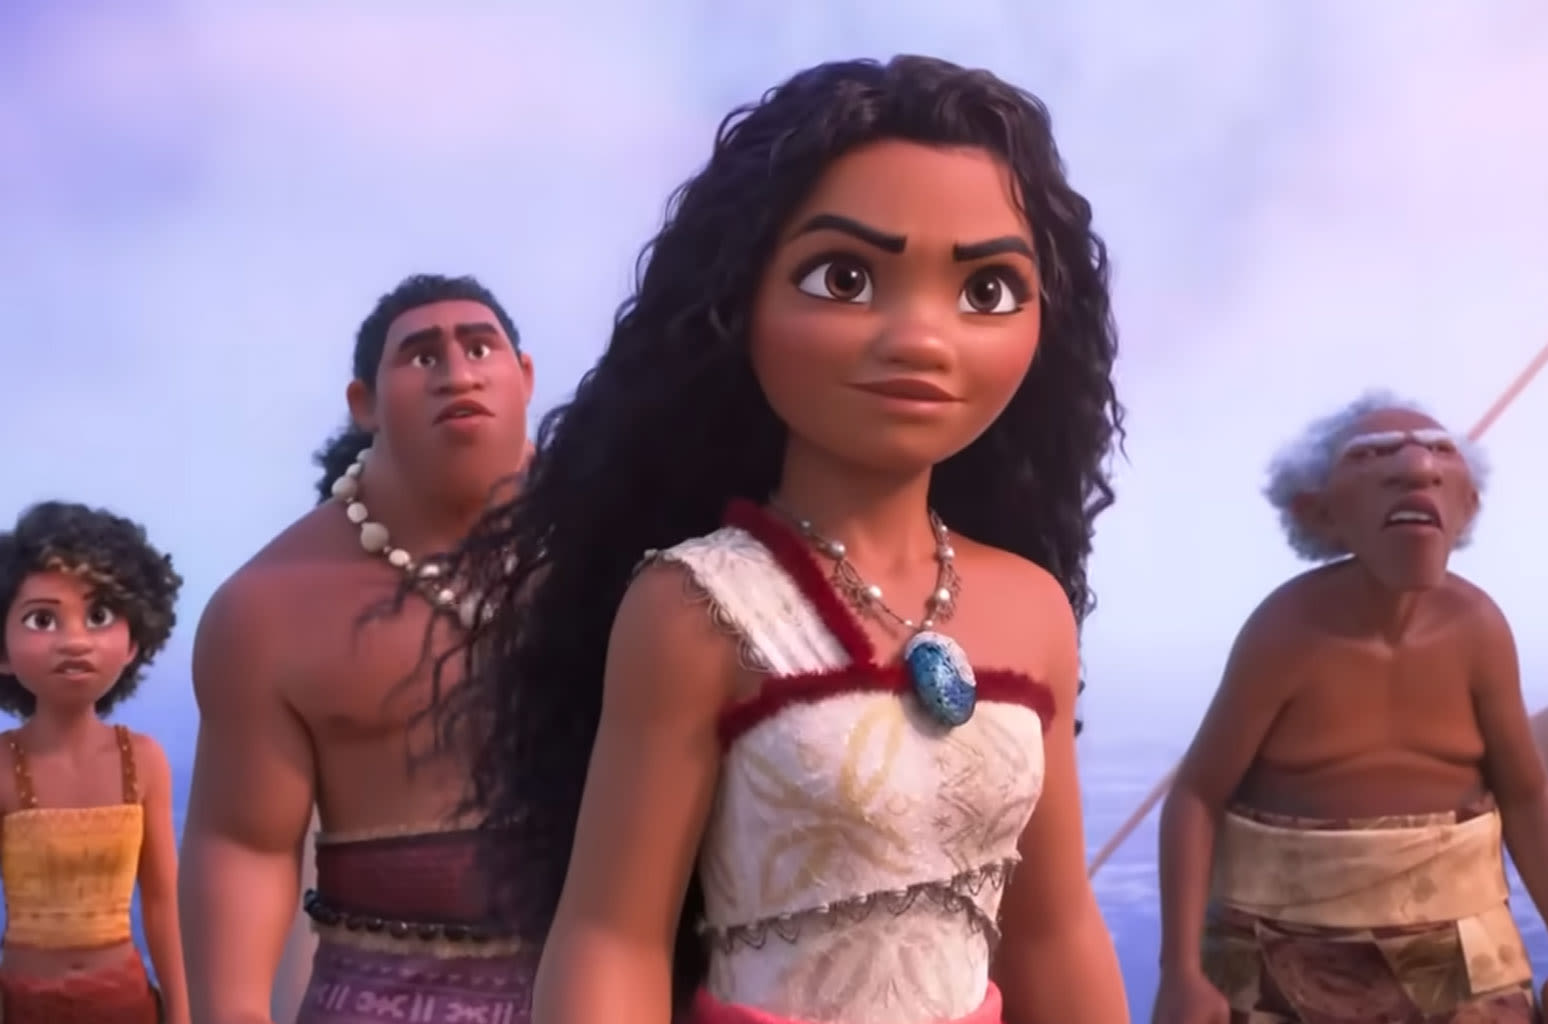 ‘Moana 2’ Trailer Breaks Disney Record for Most-Watched Animated Film Teaser in 24 Hours: Watch